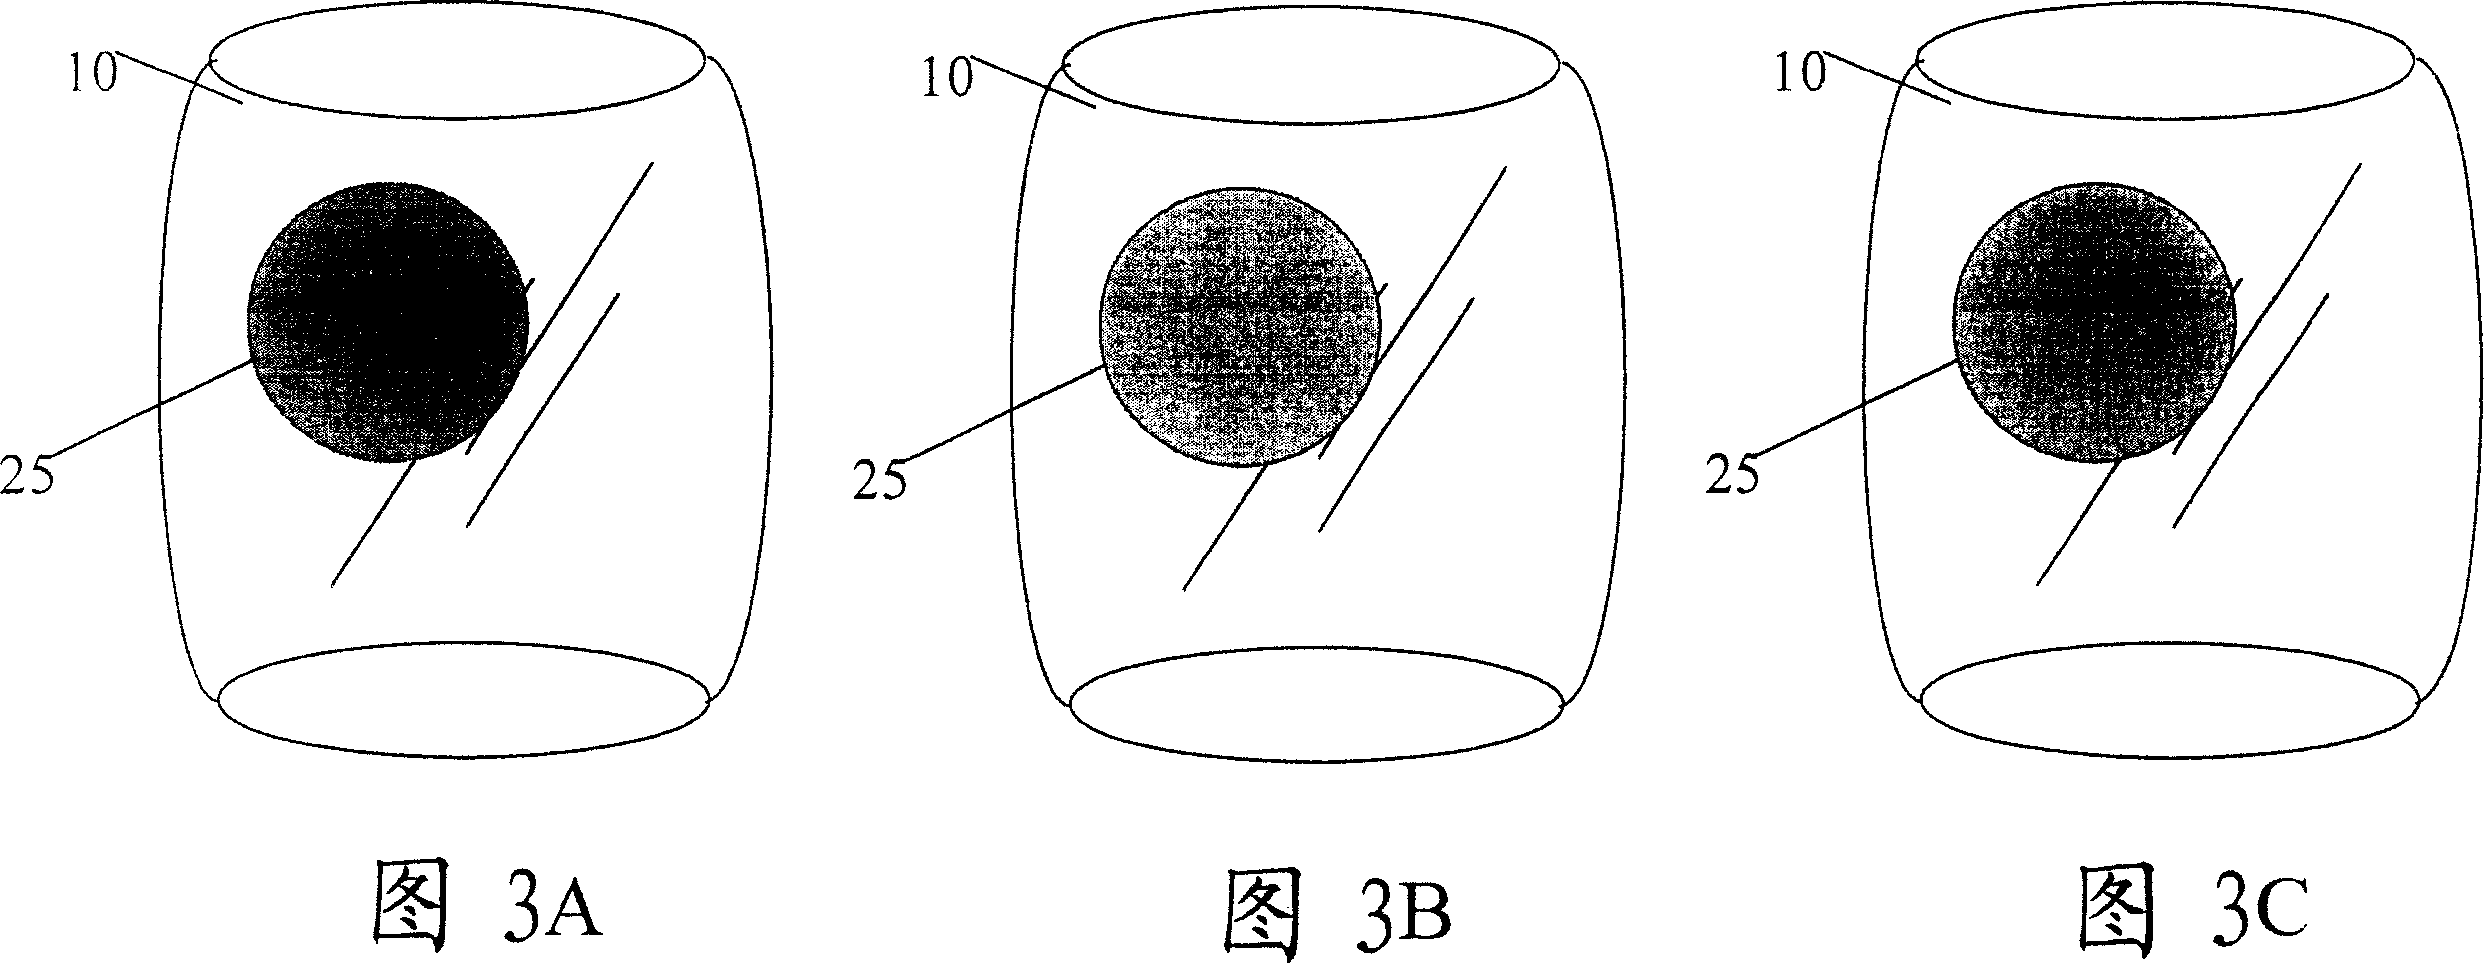 Temperature displaying domestic vessel of non-themal insulation and non-electrically heating type